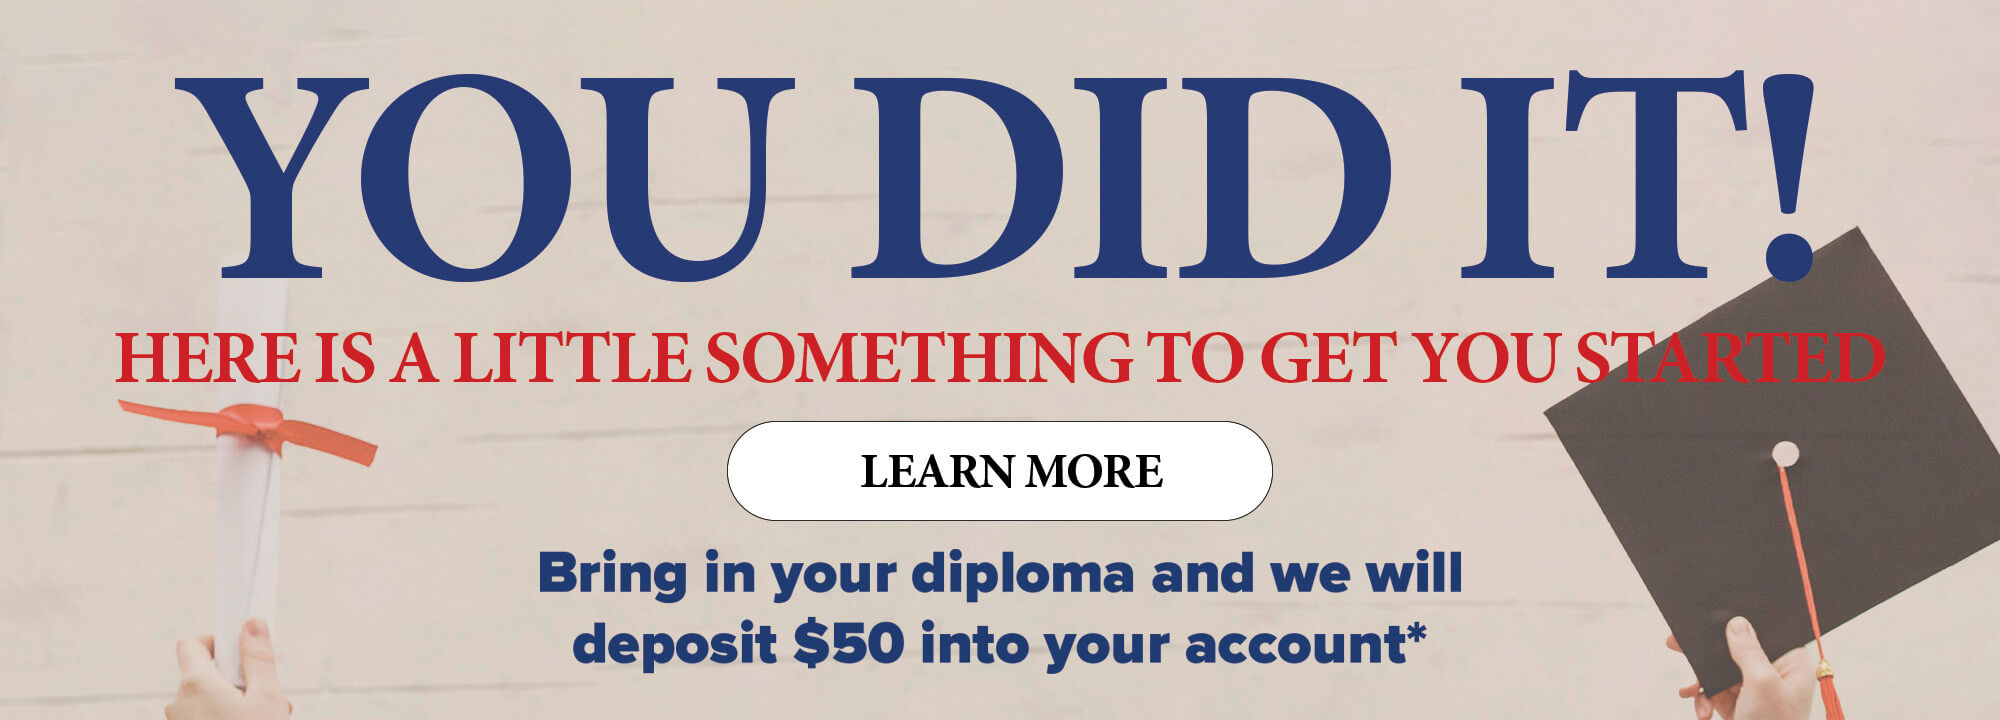 You did it! Here is a little something to get you started. Learn more. Bring in your diploma and we will deposit $50 into your account.